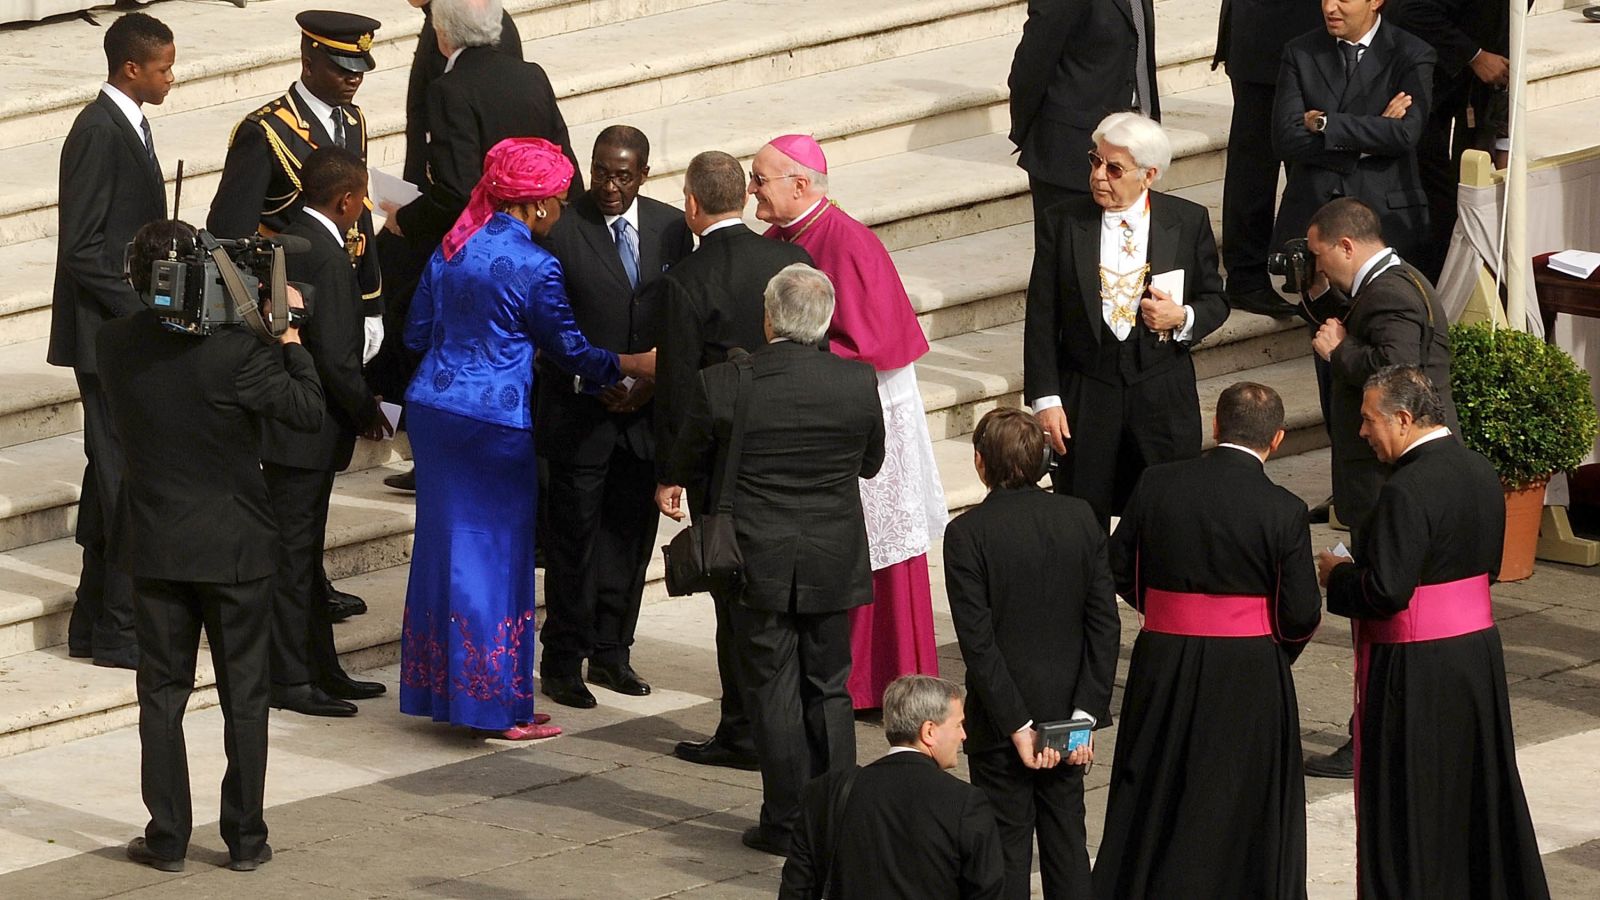 Robert and Grace Mugabe arrive at the Vatican for the beatification ceremony of John Paul II in May 2011.